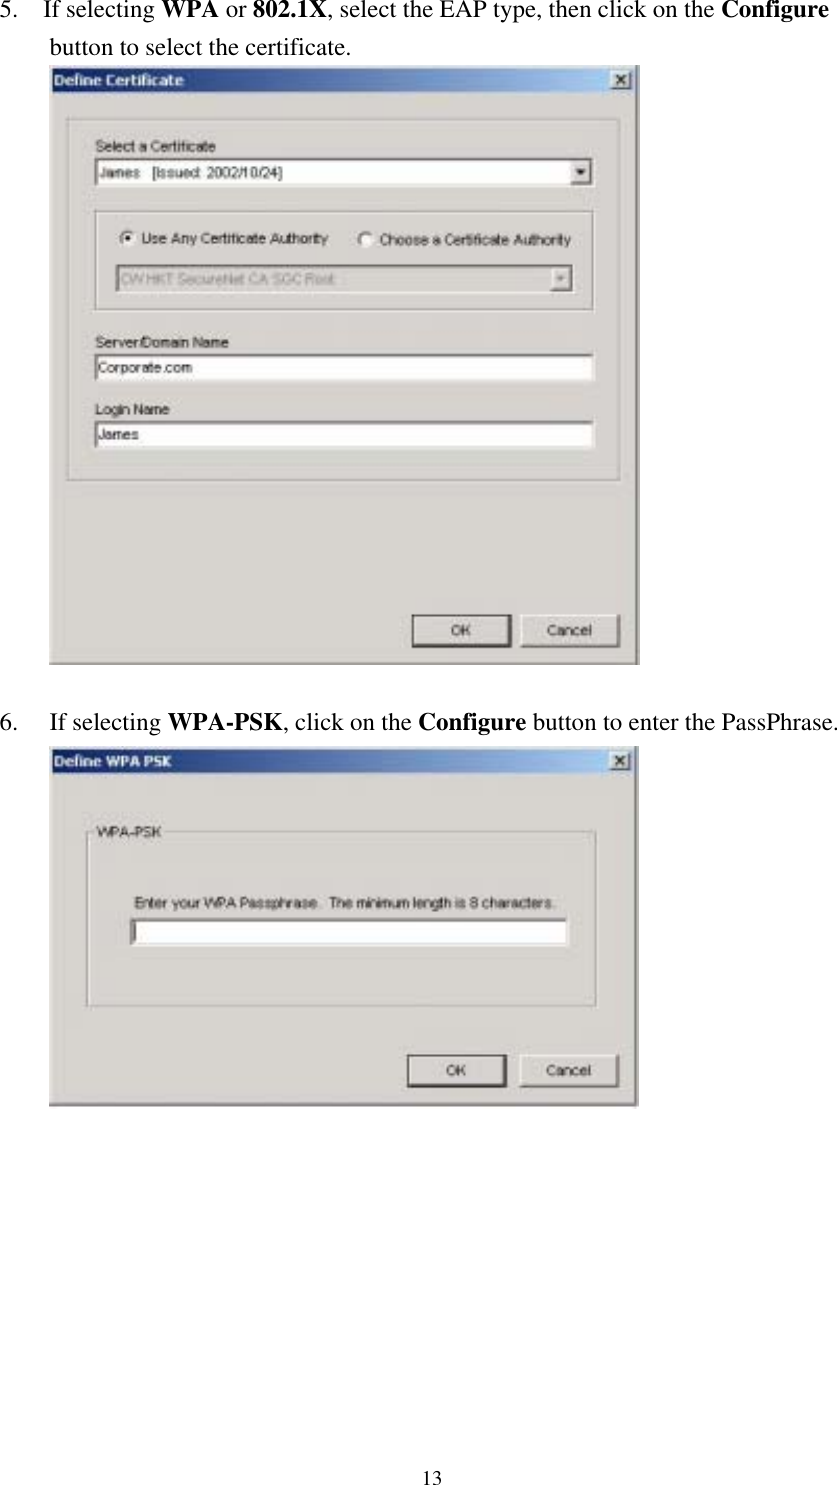  135.  If selecting WPA or 802.1X, select the EAP type, then click on the Configure button to select the certificate.        6.   If selecting WPA-PSK, click on the Configure button to enter the PassPhrase.        